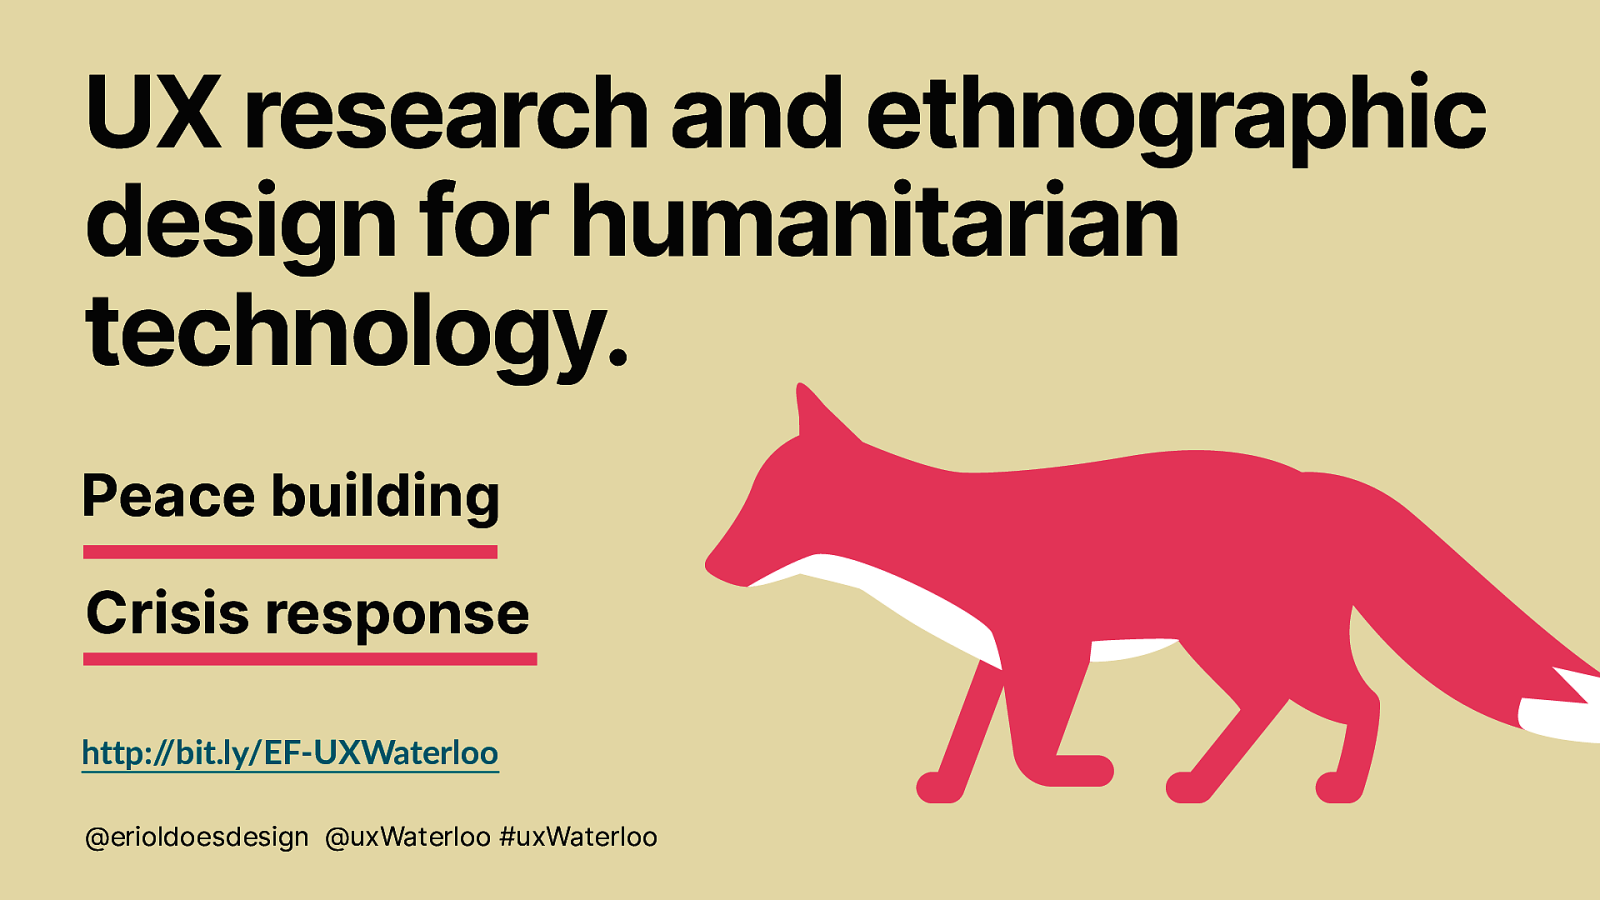 UX research and ethnographic design for humanitarian technology.